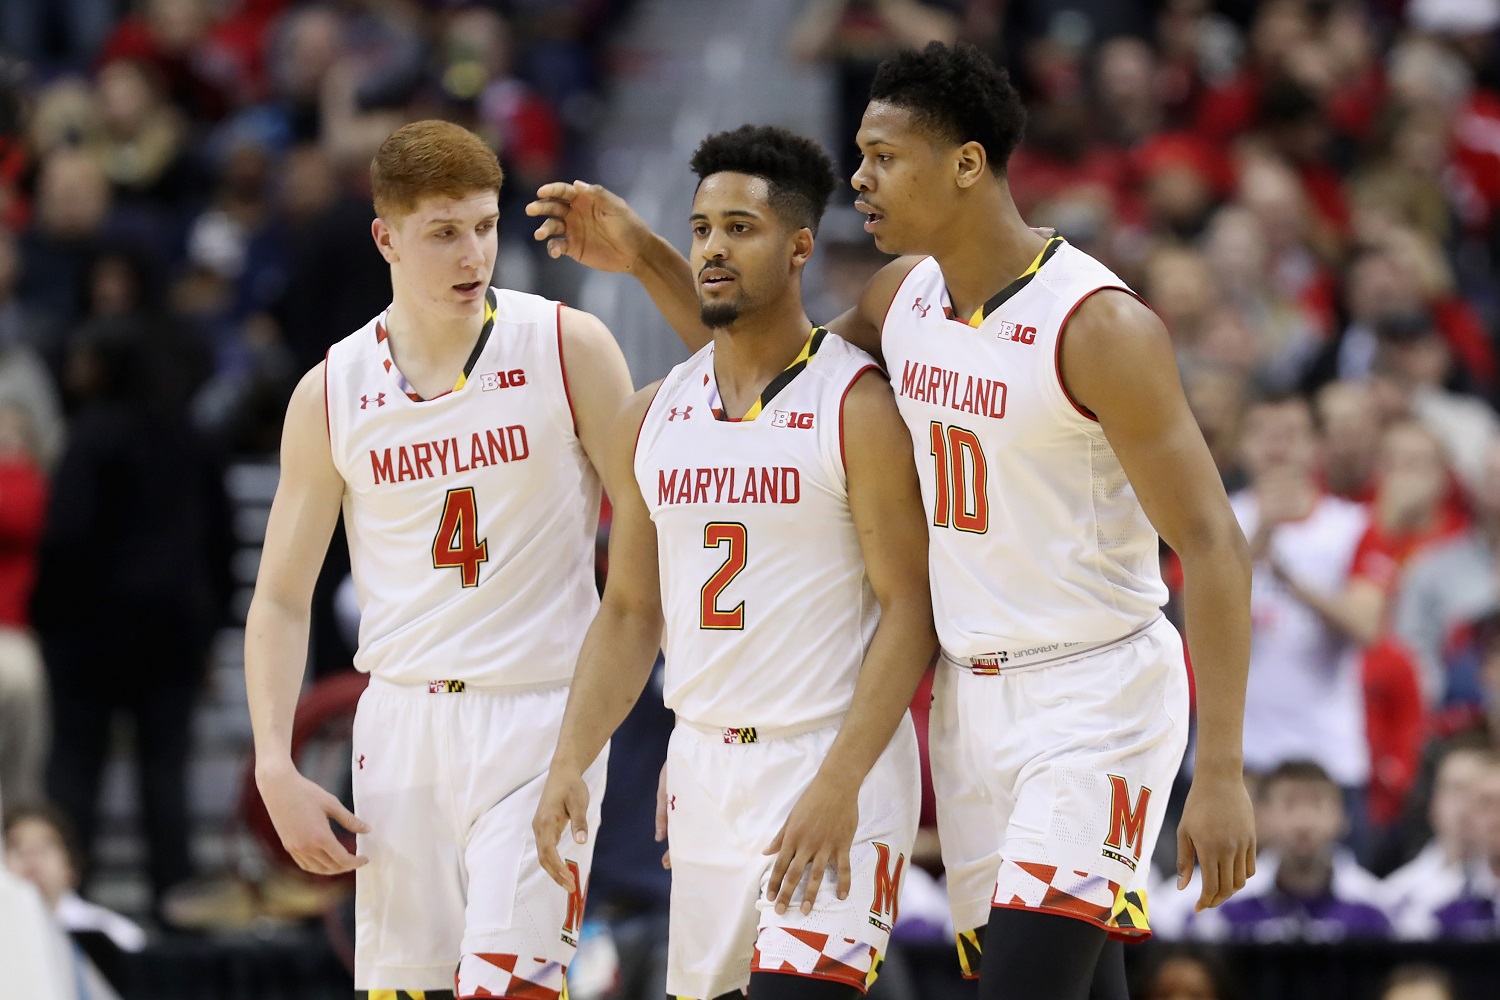 WASHINGTON, DC - MARCH 10: Kevin Huerter #4, Melo Trimble #2, and L.G. Gill #10 of the Maryland Terrapins talk on the floor during the first half against the Northwestern Wildcats during the Big Ten Basketball Tournament at Verizon Center on March 10, 2017 in Washington, DC.  (Photo by Rob Carr/Getty Images)